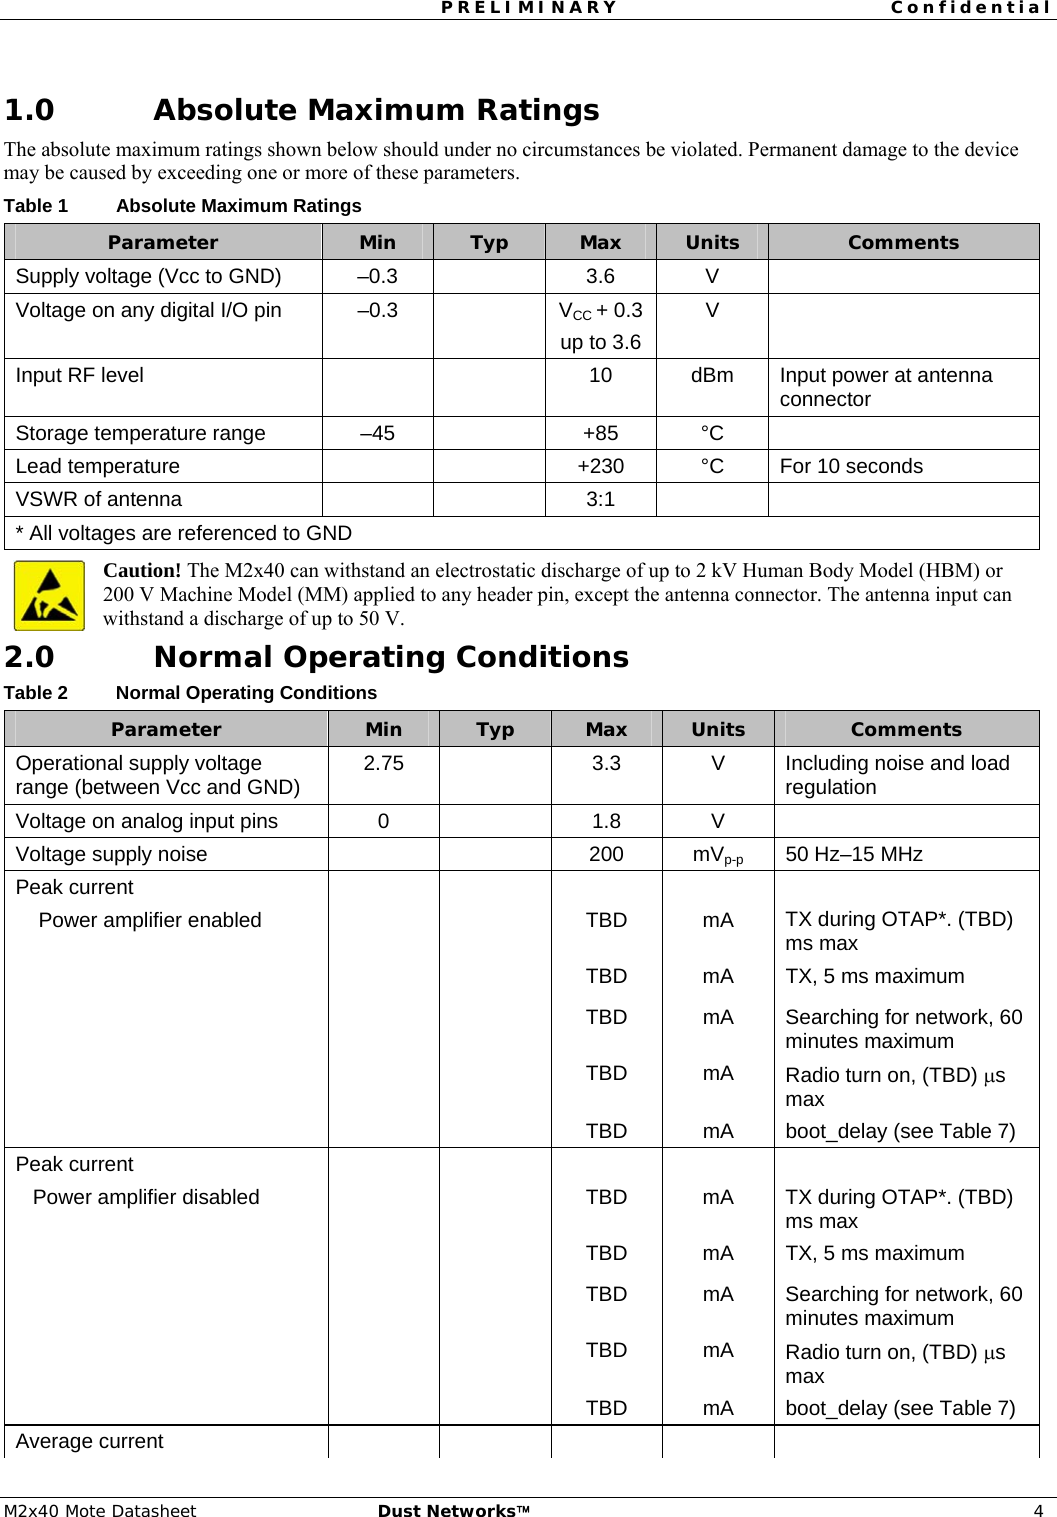 PRELIMINARY Confidential  M2x40 Mote Datasheet  Dust Networks™ 4  1.0 Absolute Maximum Ratings The absolute maximum ratings shown below should under no circumstances be violated. Permanent damage to the device may be caused by exceeding one or more of these parameters. Table 1  Absolute Maximum Ratings Parameter  Min  Typ  Max  Units  Comments Supply voltage (Vcc to GND)  –0.3    3.6  V   Voltage on any digital I/O pin  –0.3    VCC + 0.3 up to 3.6 V  Input RF level      10  dBm  Input power at antenna connector Storage temperature range  –45    +85  °C   Lead temperature      +230  °C  For 10 seconds VSWR of antenna      3:1     * All voltages are referenced to GND Caution! The M2x40 can withstand an electrostatic discharge of up to 2 kV Human Body Model (HBM) or  200 V Machine Model (MM) applied to any header pin, except the antenna connector. The antenna input can withstand a discharge of up to 50 V. 2.0 Normal Operating Conditions Table 2  Normal Operating Conditions Parameter  Min  Typ  Max  Units  Comments Operational supply voltage range (between Vcc and GND)  2.75   3.3 V Including noise and load regulation Voltage on analog input pins  0    1.8  V   Voltage supply noise      200  mVp-p  50 Hz–15 MHz Peak current     Power amplifier enabled    TBD  mA  TX during OTAP*. (TBD) ms max       TBD  mA  TX, 5 ms maximum    TBD mA Searching for network, 60 minutes maximum     TBD mA Radio turn on, (TBD) μs max       TBD  mA  boot_delay (see Table 7) Peak current    Power amplifier disabled    TBD  mA  TX during OTAP*. (TBD) ms max       TBD  mA  TX, 5 ms maximum    TBD mA Searching for network, 60 minutes maximum     TBD mA Radio turn on, (TBD) μs max       TBD  mA  boot_delay (see Table 7) Average current           